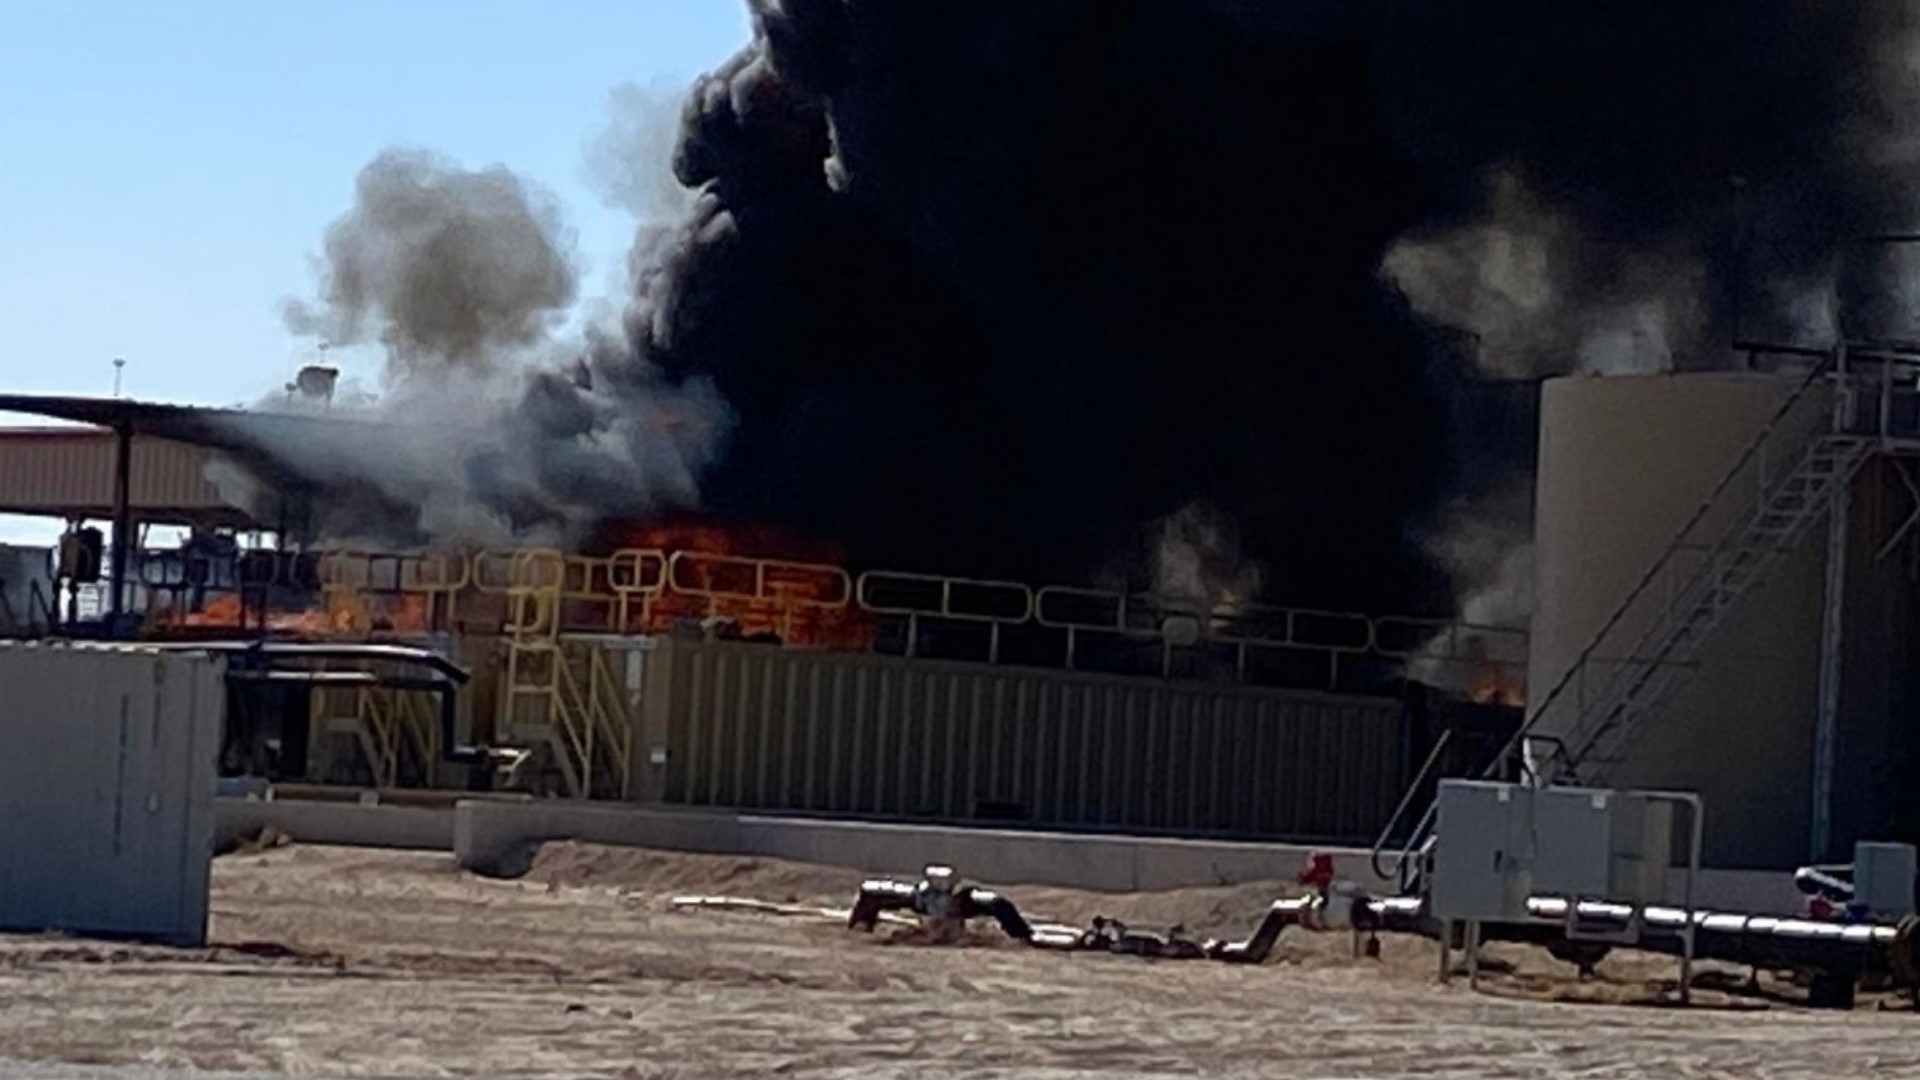 A spokesperson for the county says around 21,000 gallons of crude oil and wastewater were on fire.